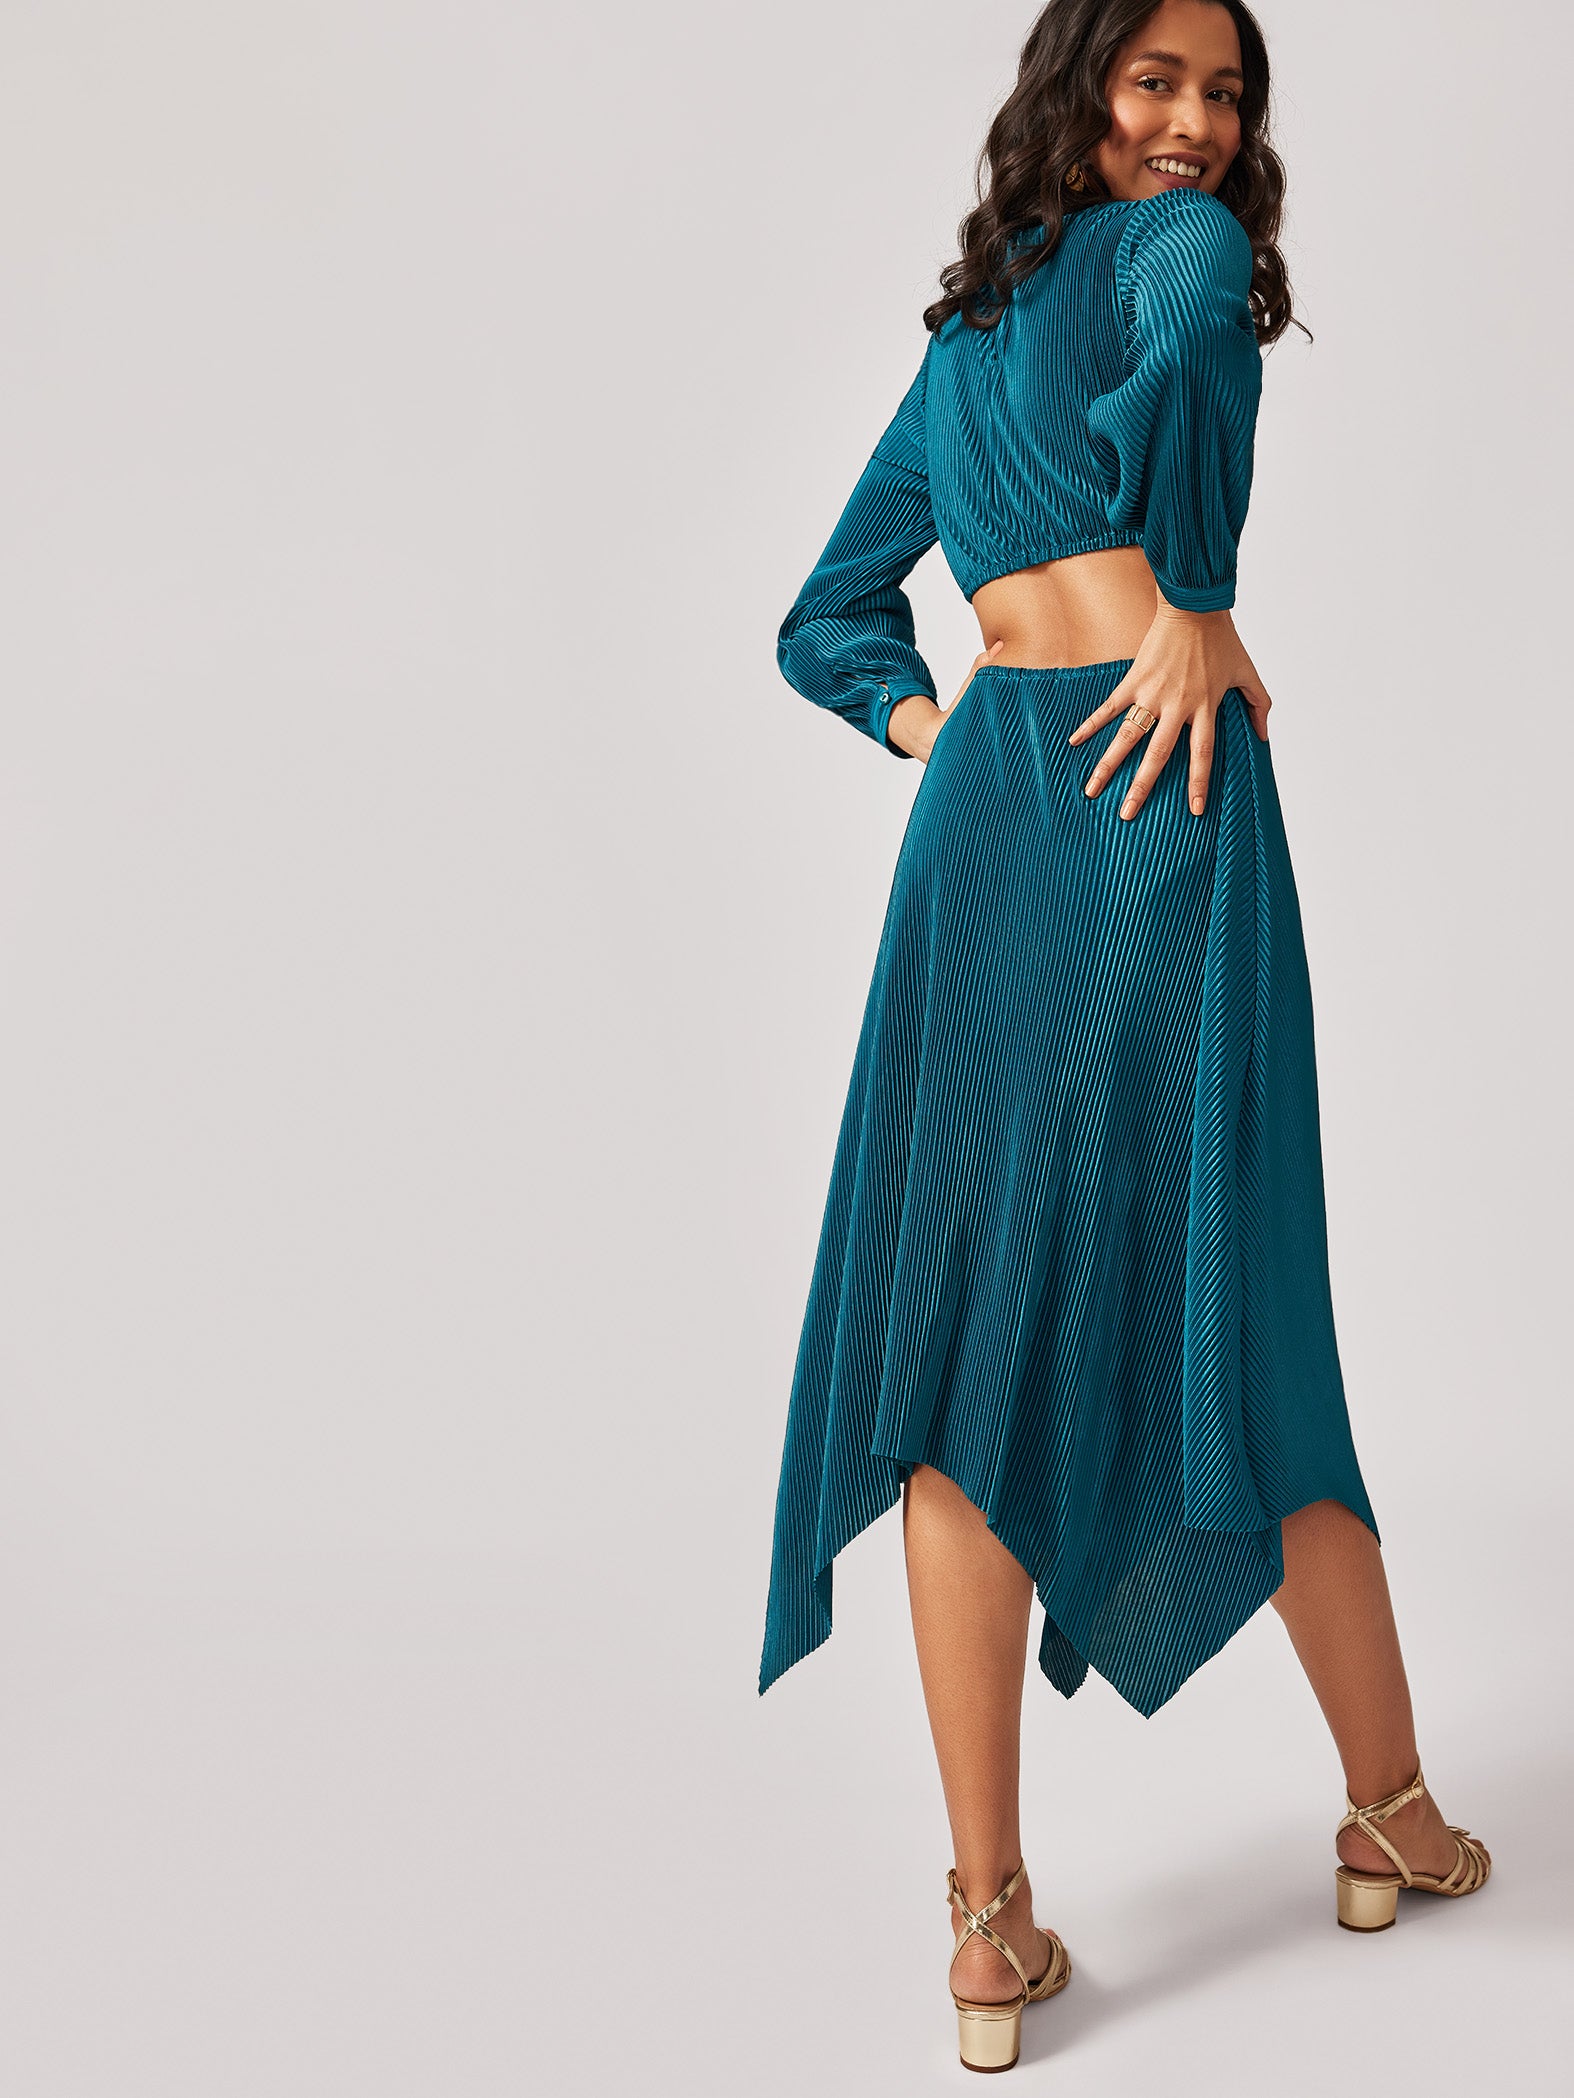 Teal Pleated Cut Out Dress